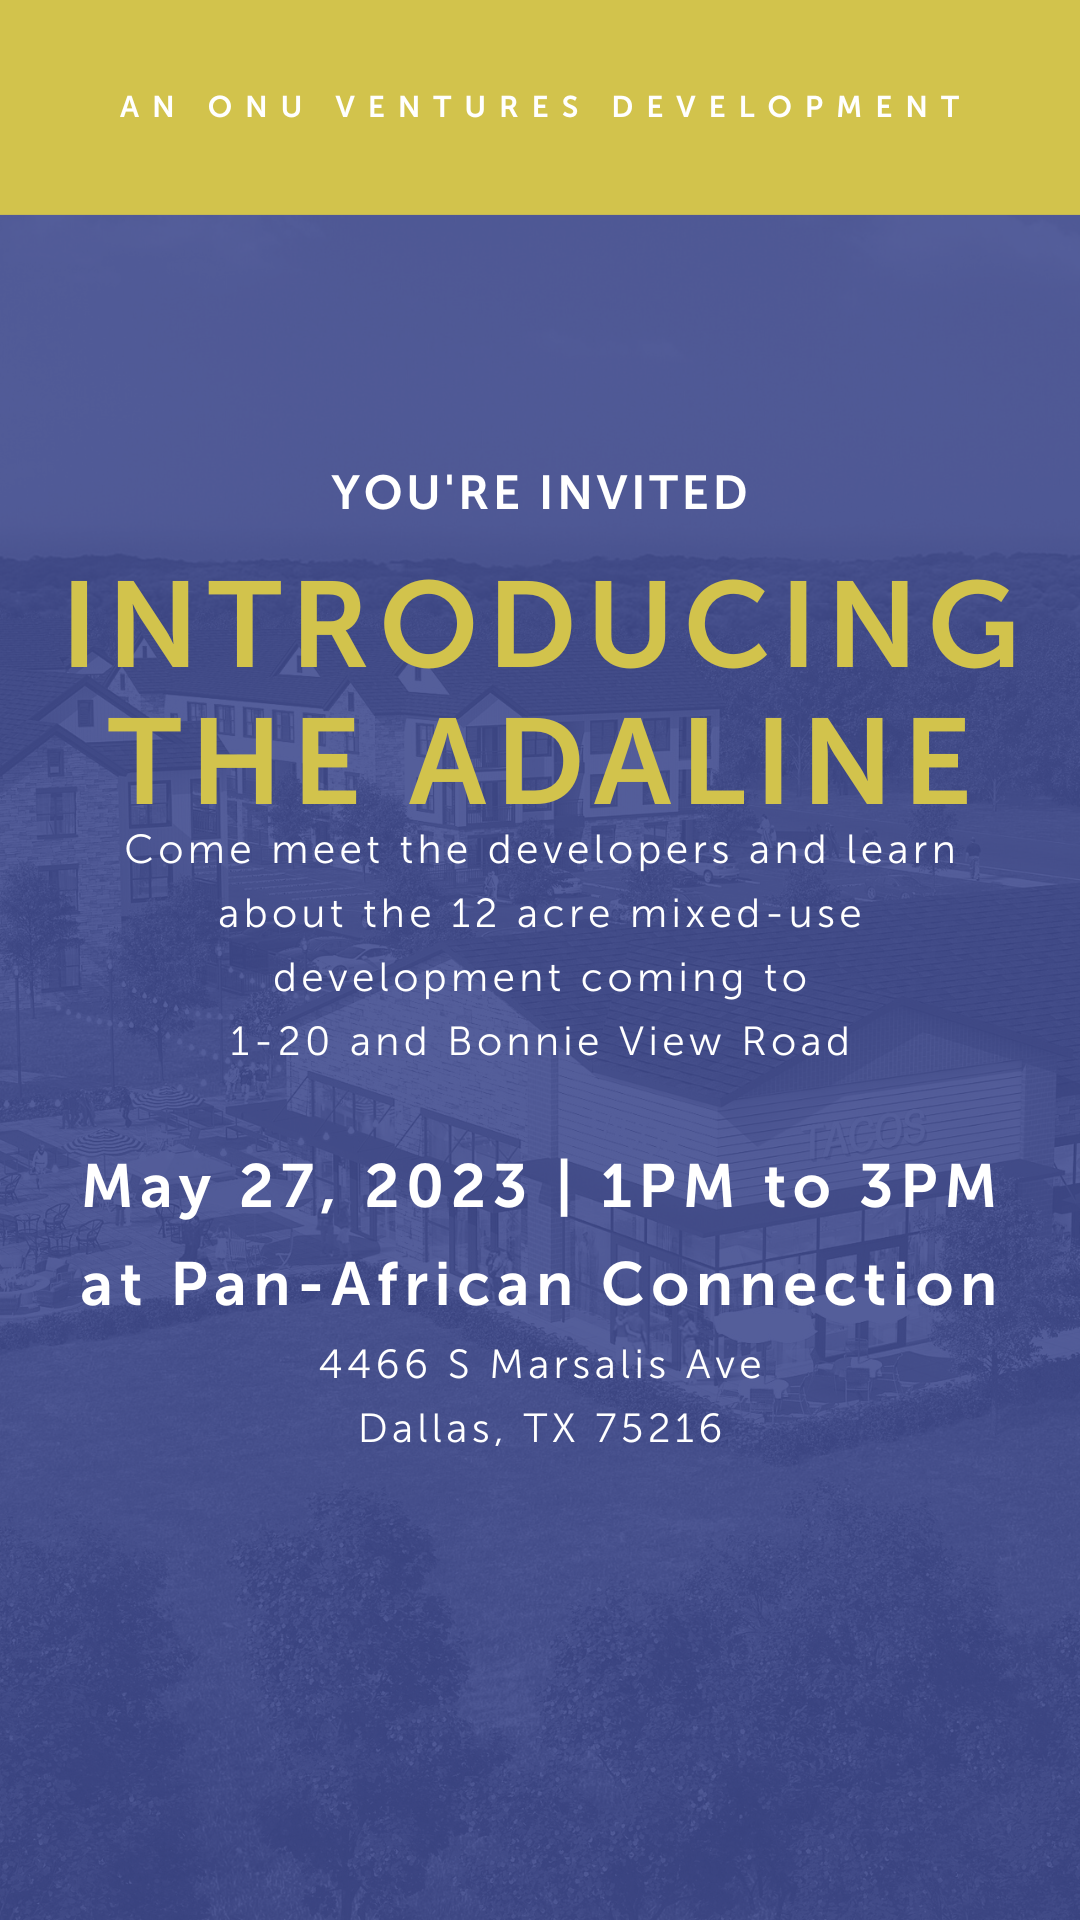 The Adaline Q & A at Pan-African Connection